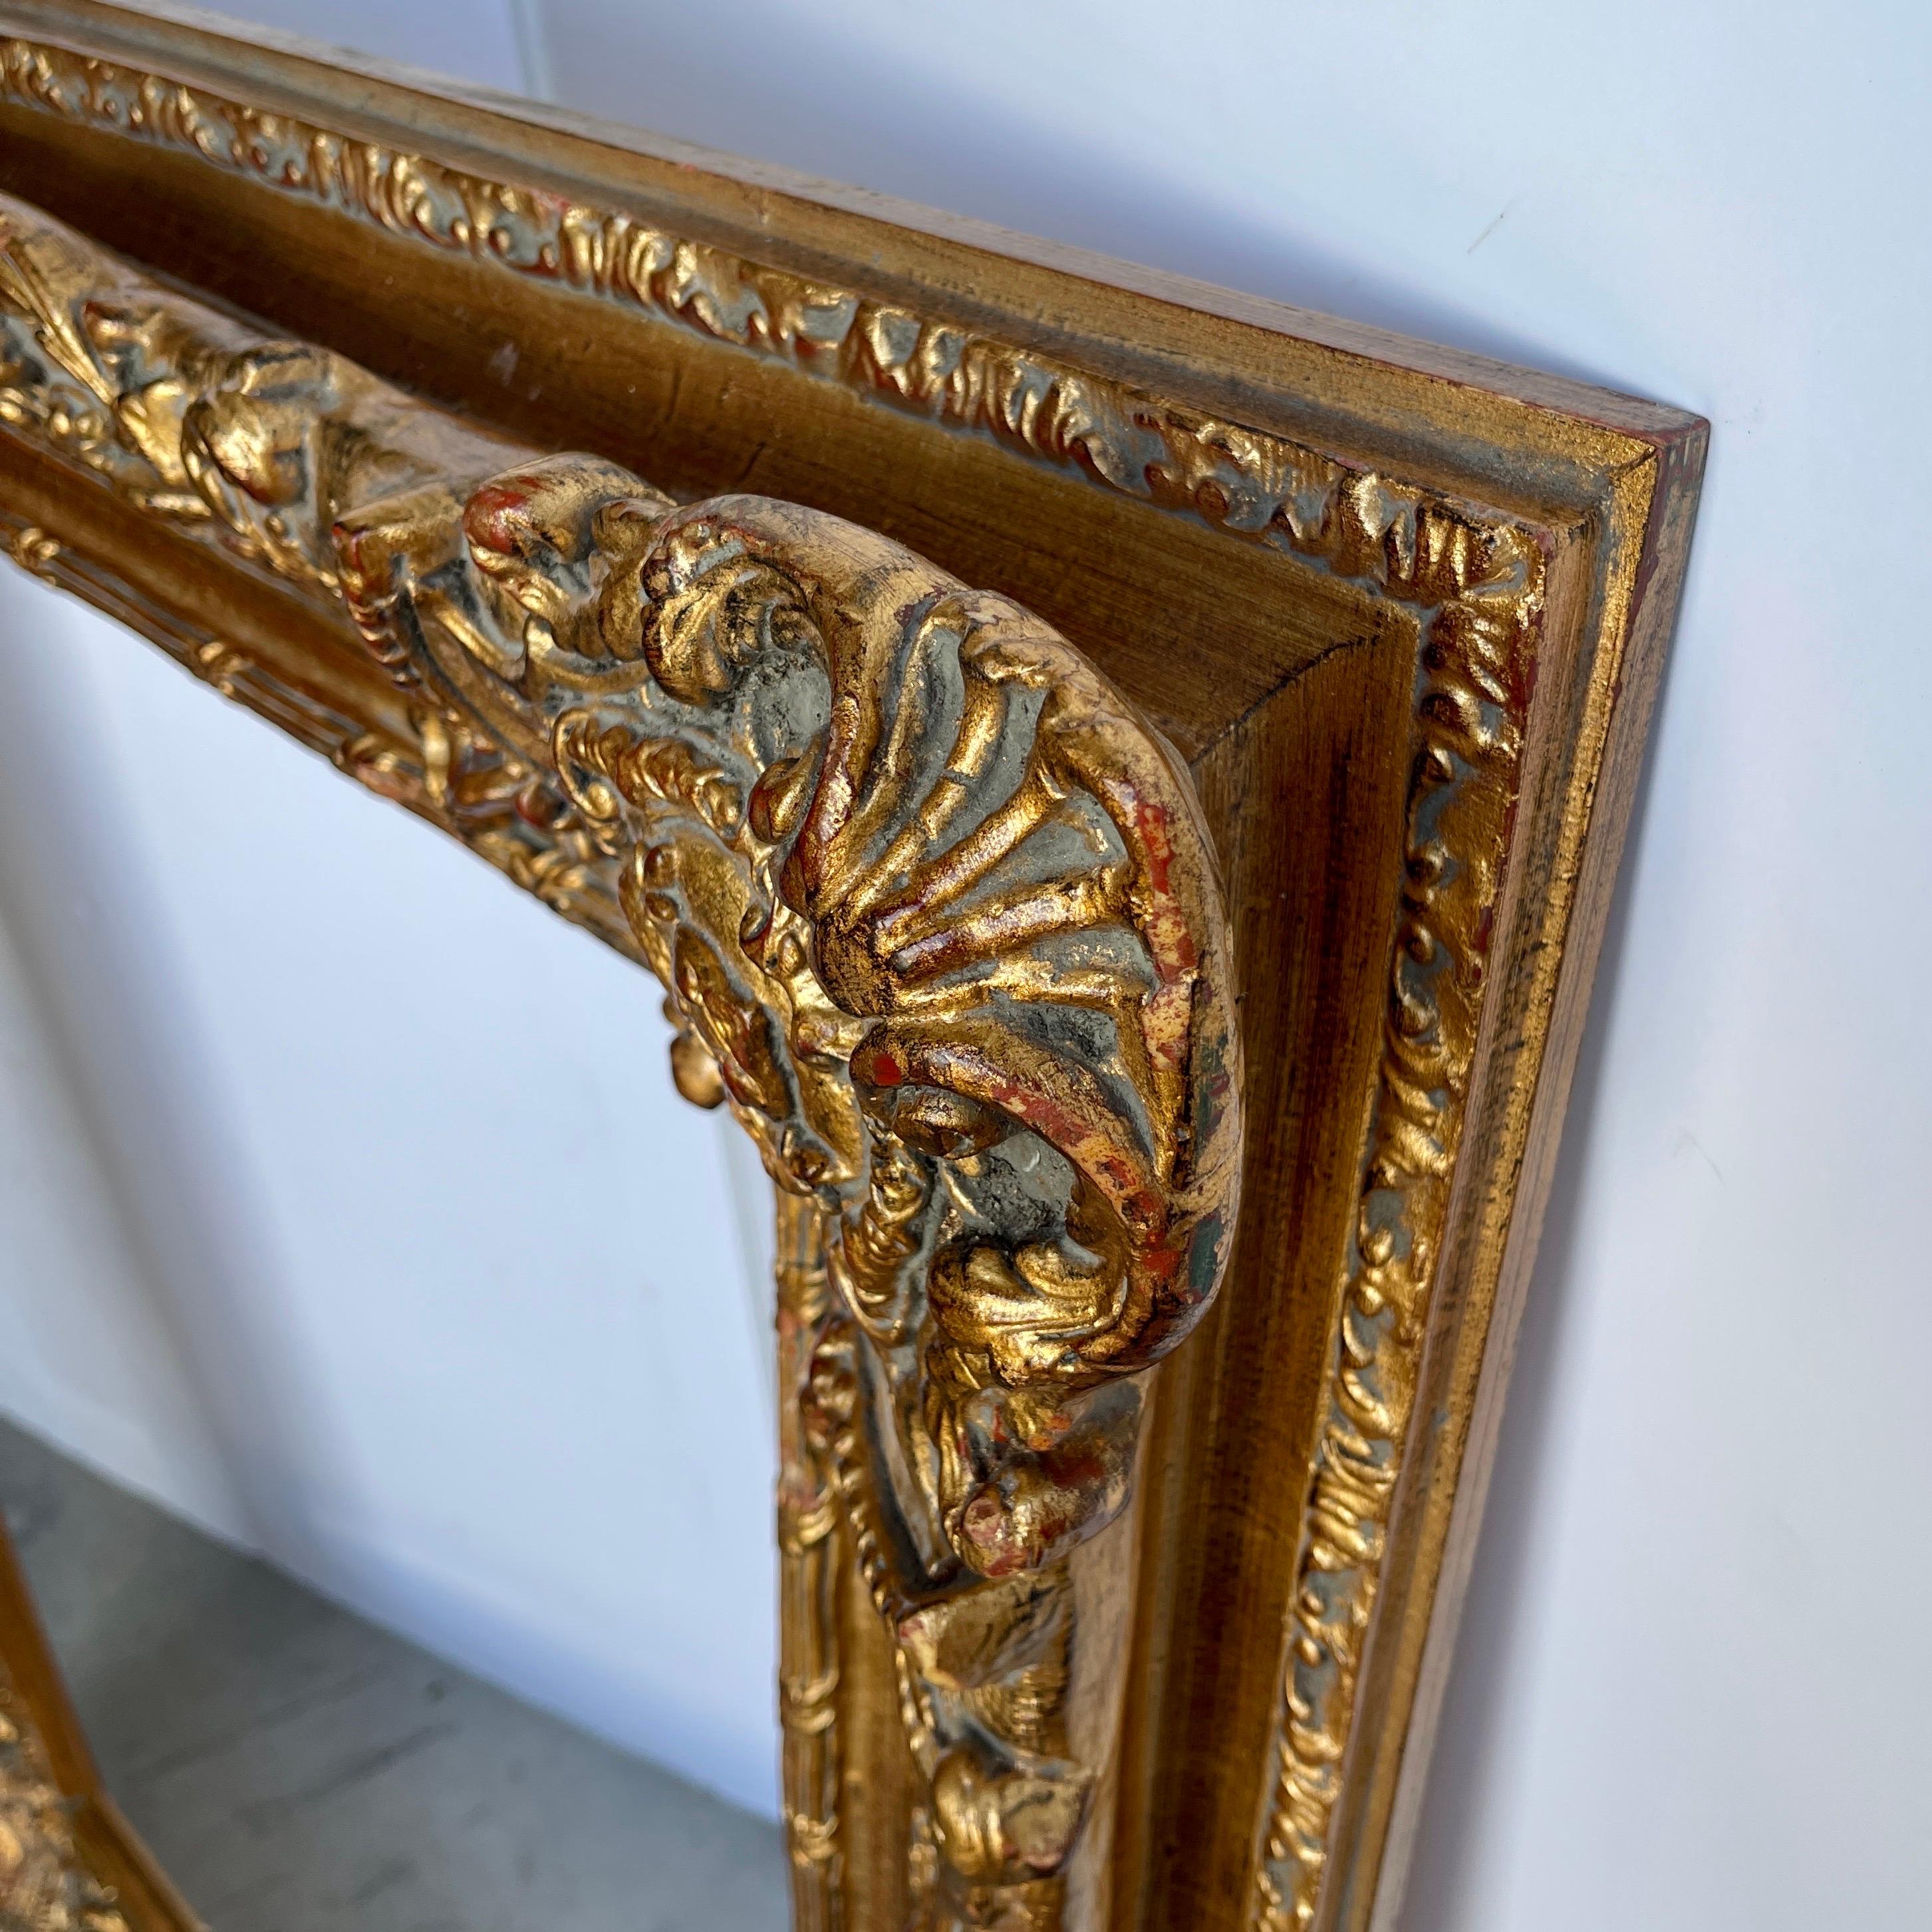 20th Century Large Ornate Carved Gilt Wood Frame, French Rococo Style  5